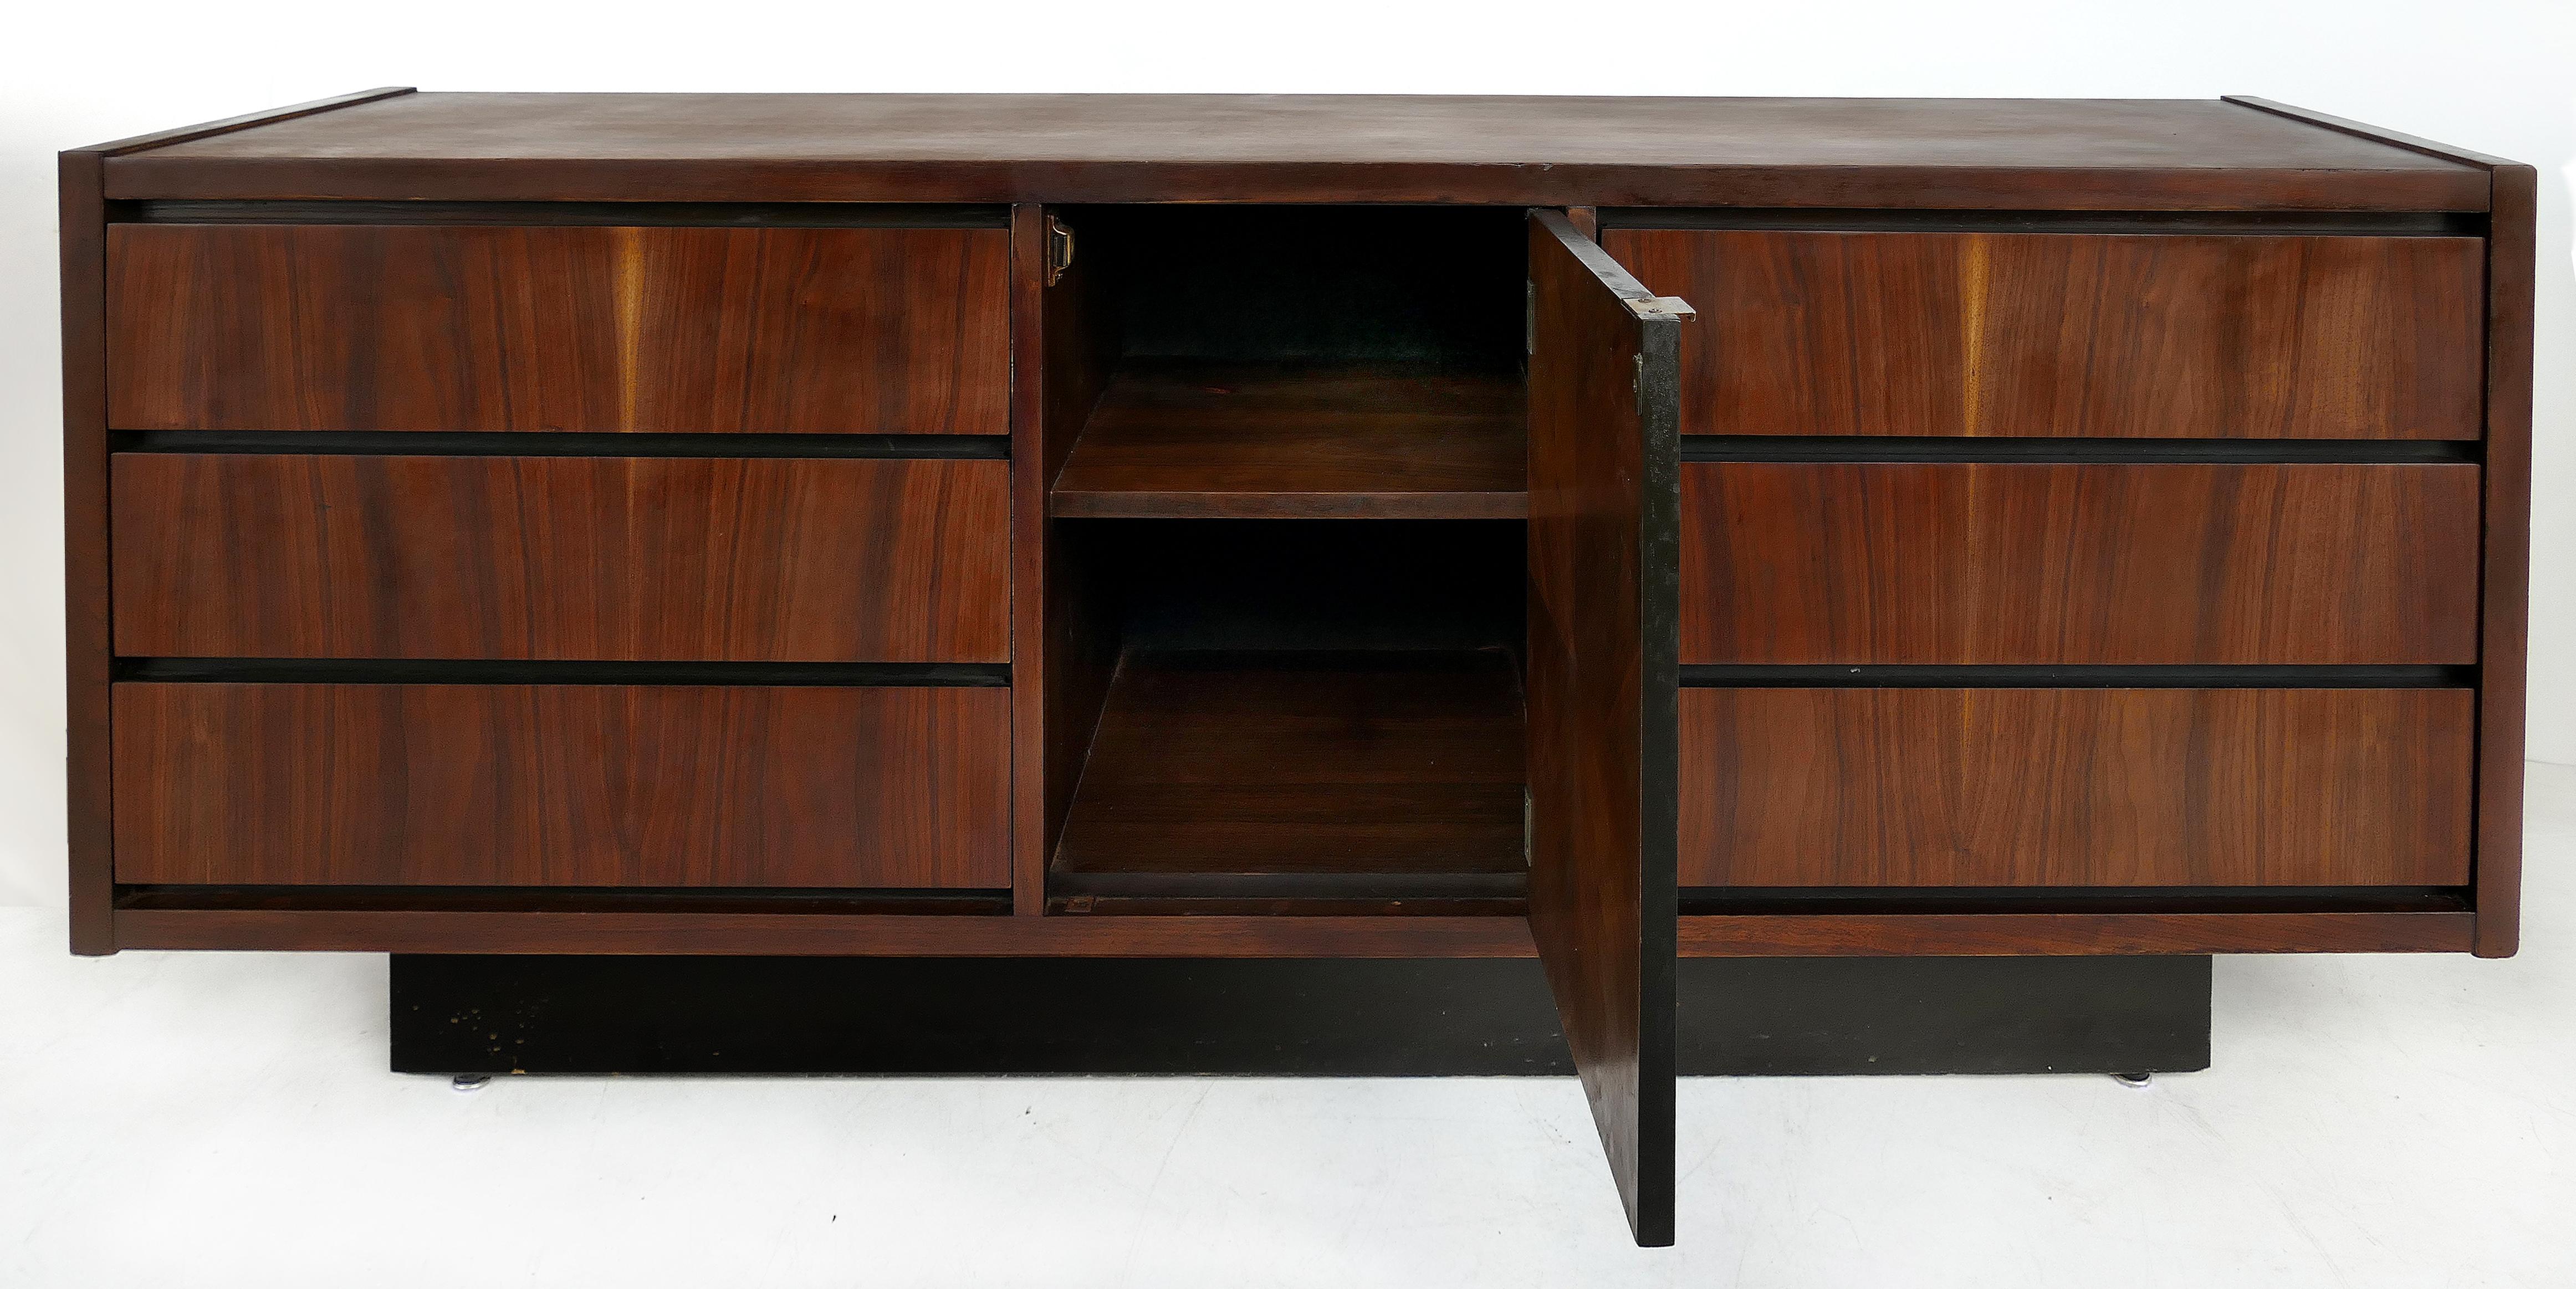 Mid-Century Modern credenza by Lane (Altavista, Virginia)

Offered for sale is a Lane (Altavista, Virginia) Mid-Century Modern credenza with center shelves and matched veneers. The center door offers ample shelving and is flanked by three drawers